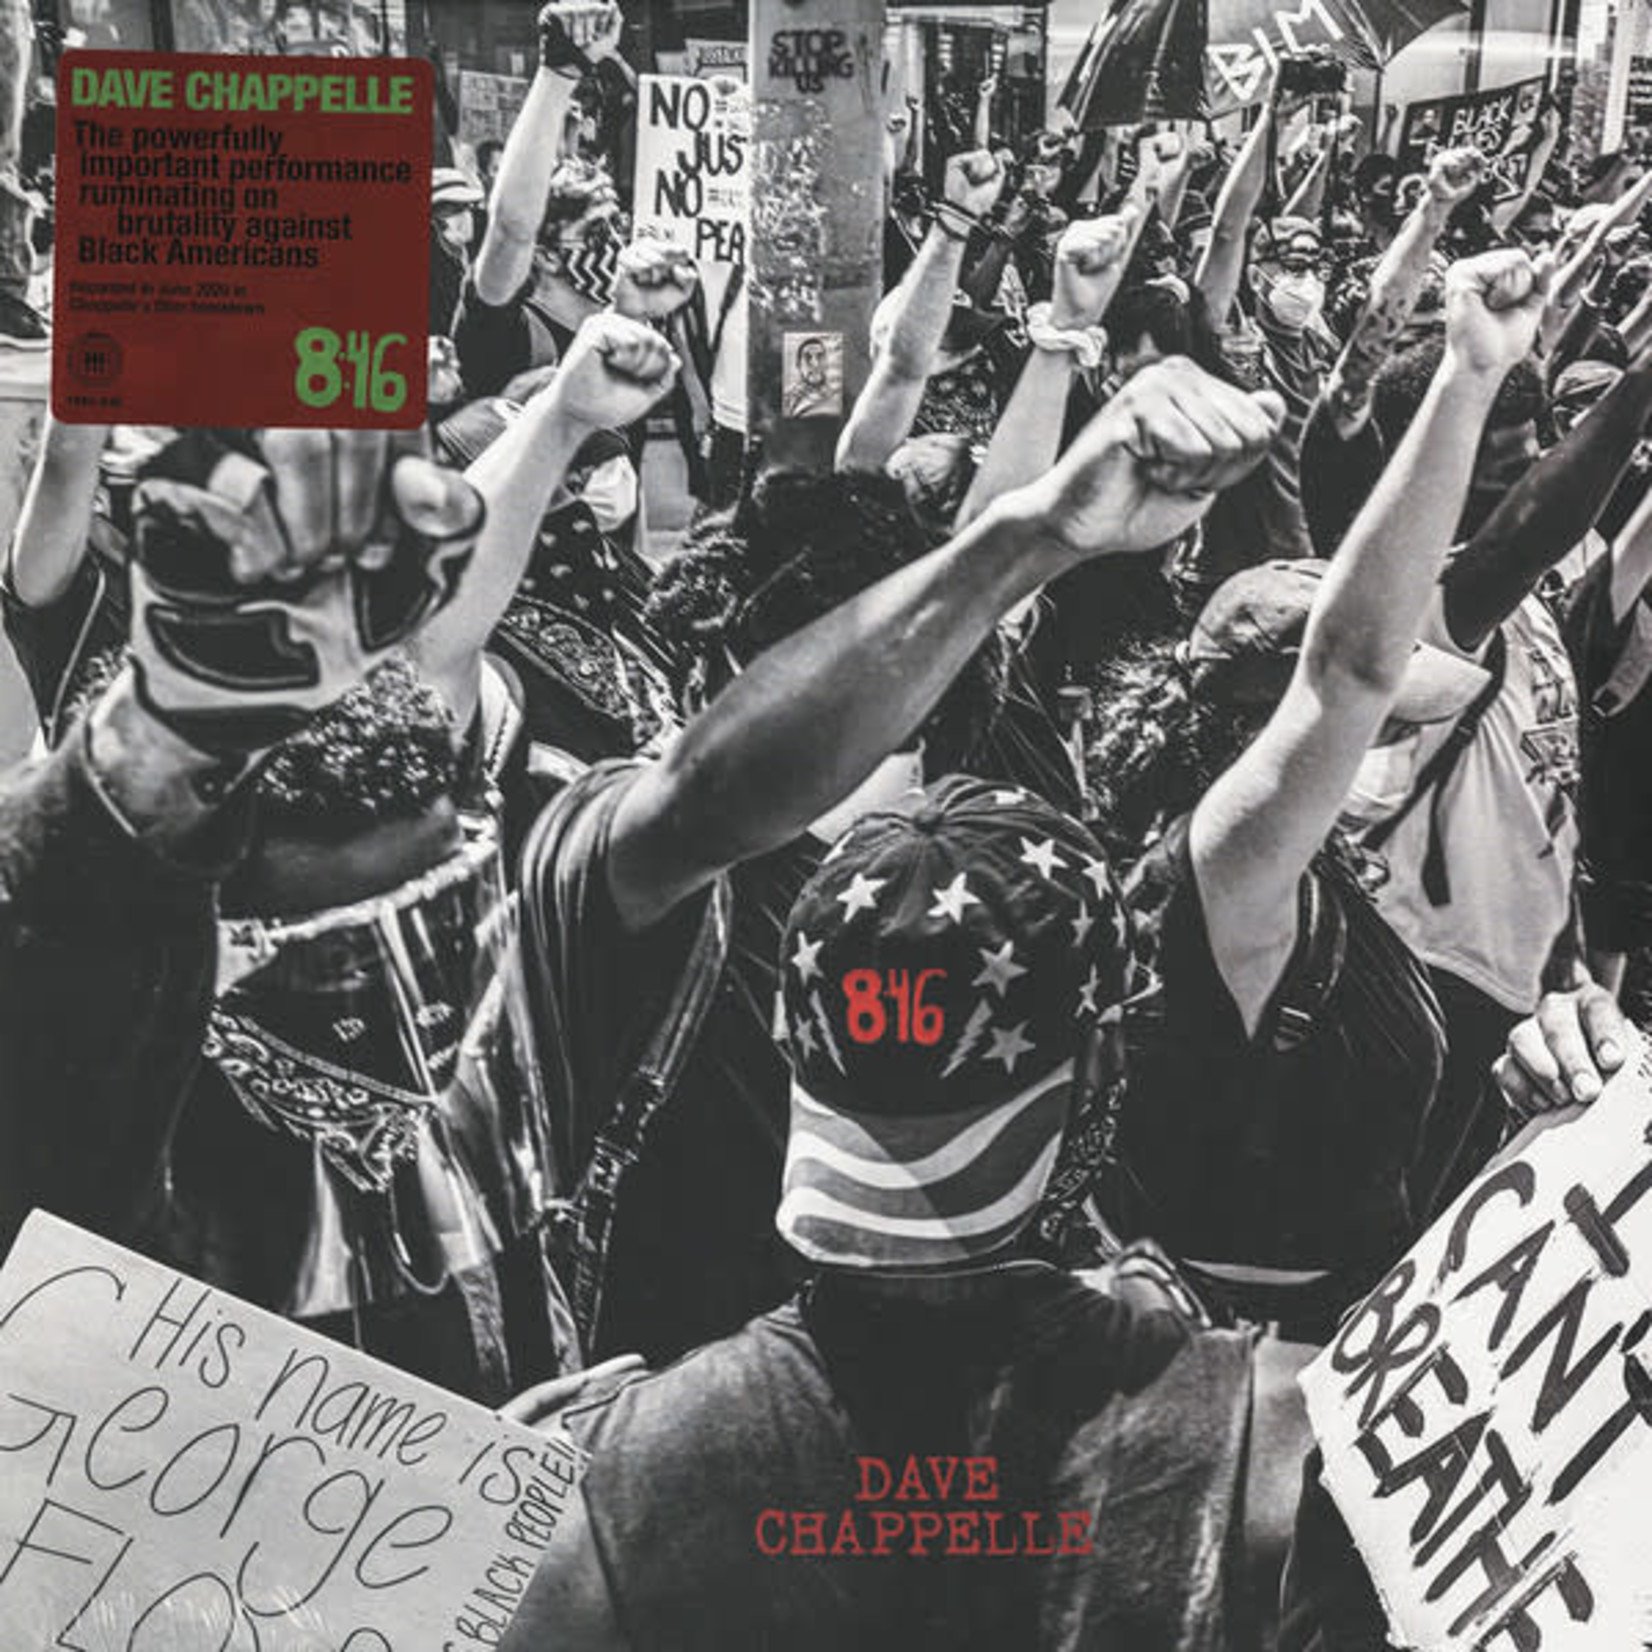 [New] Dave Chappelle - 8:46